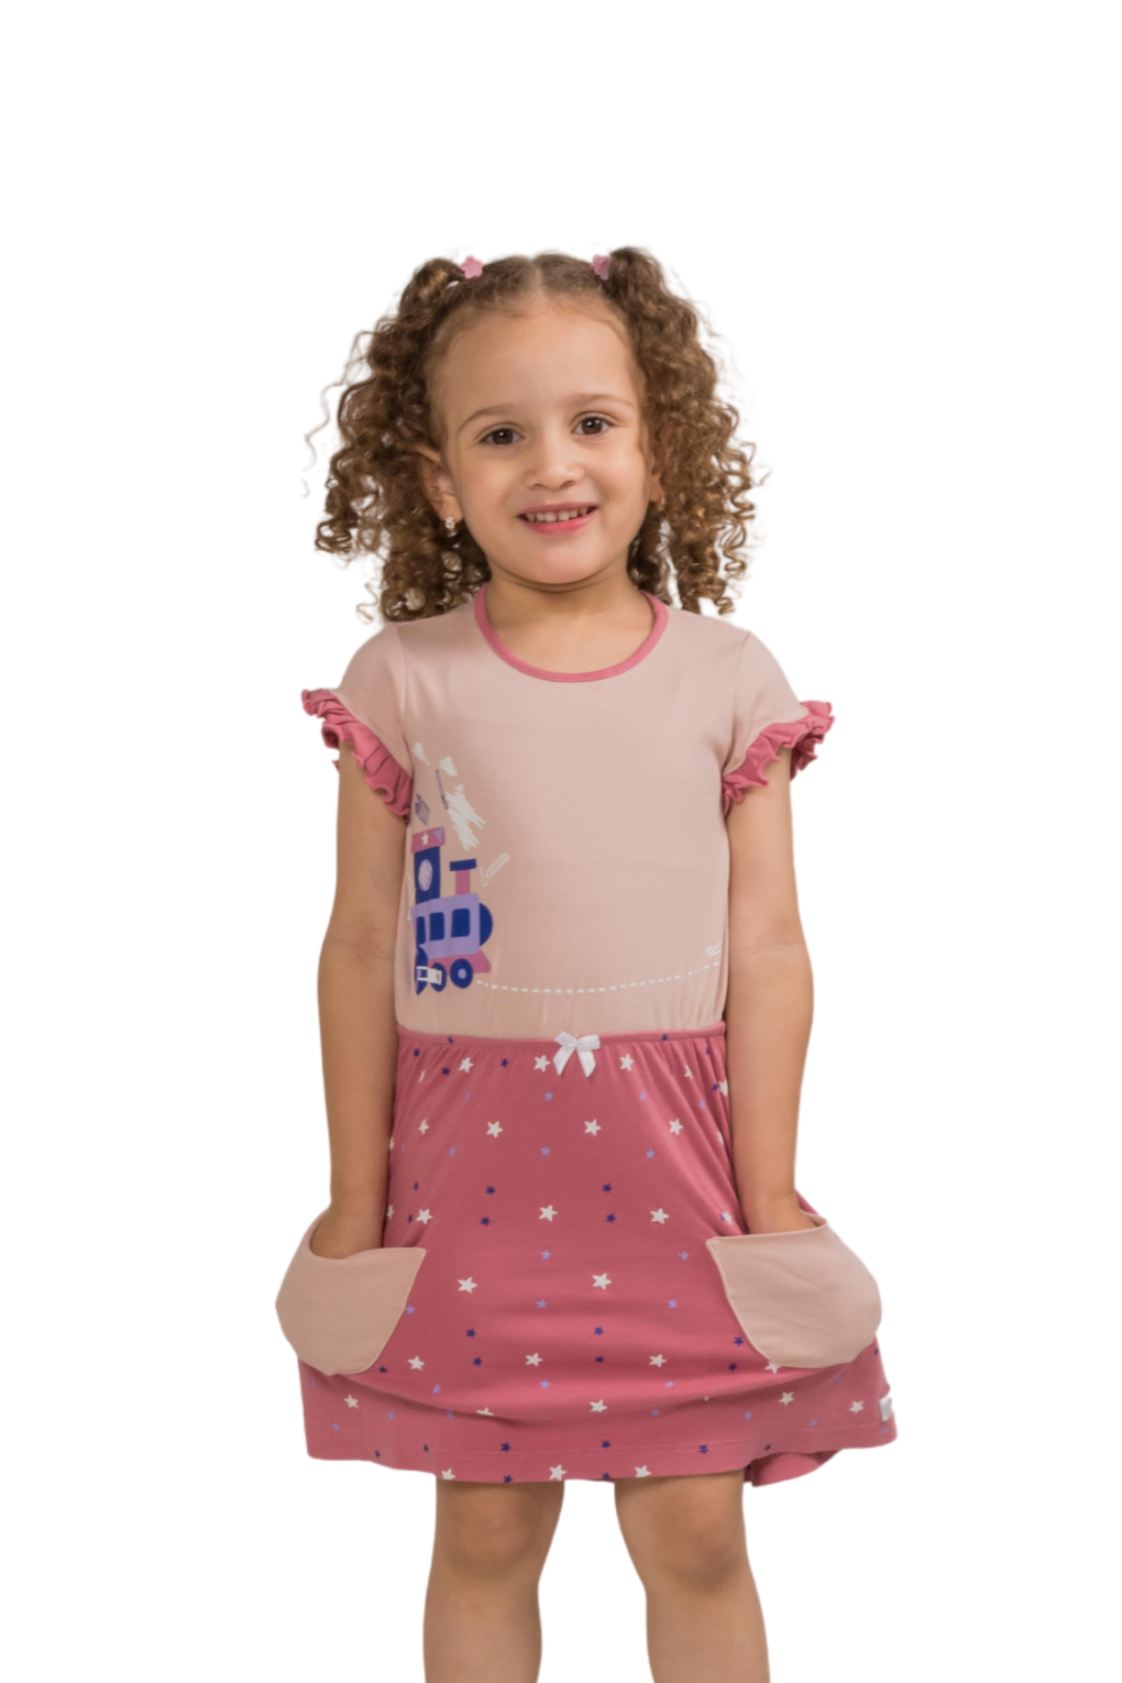 Girl dress in pink with train and stars, made in Peruvian Pima cotton, pockets, stem inspired Prisma Kiddos